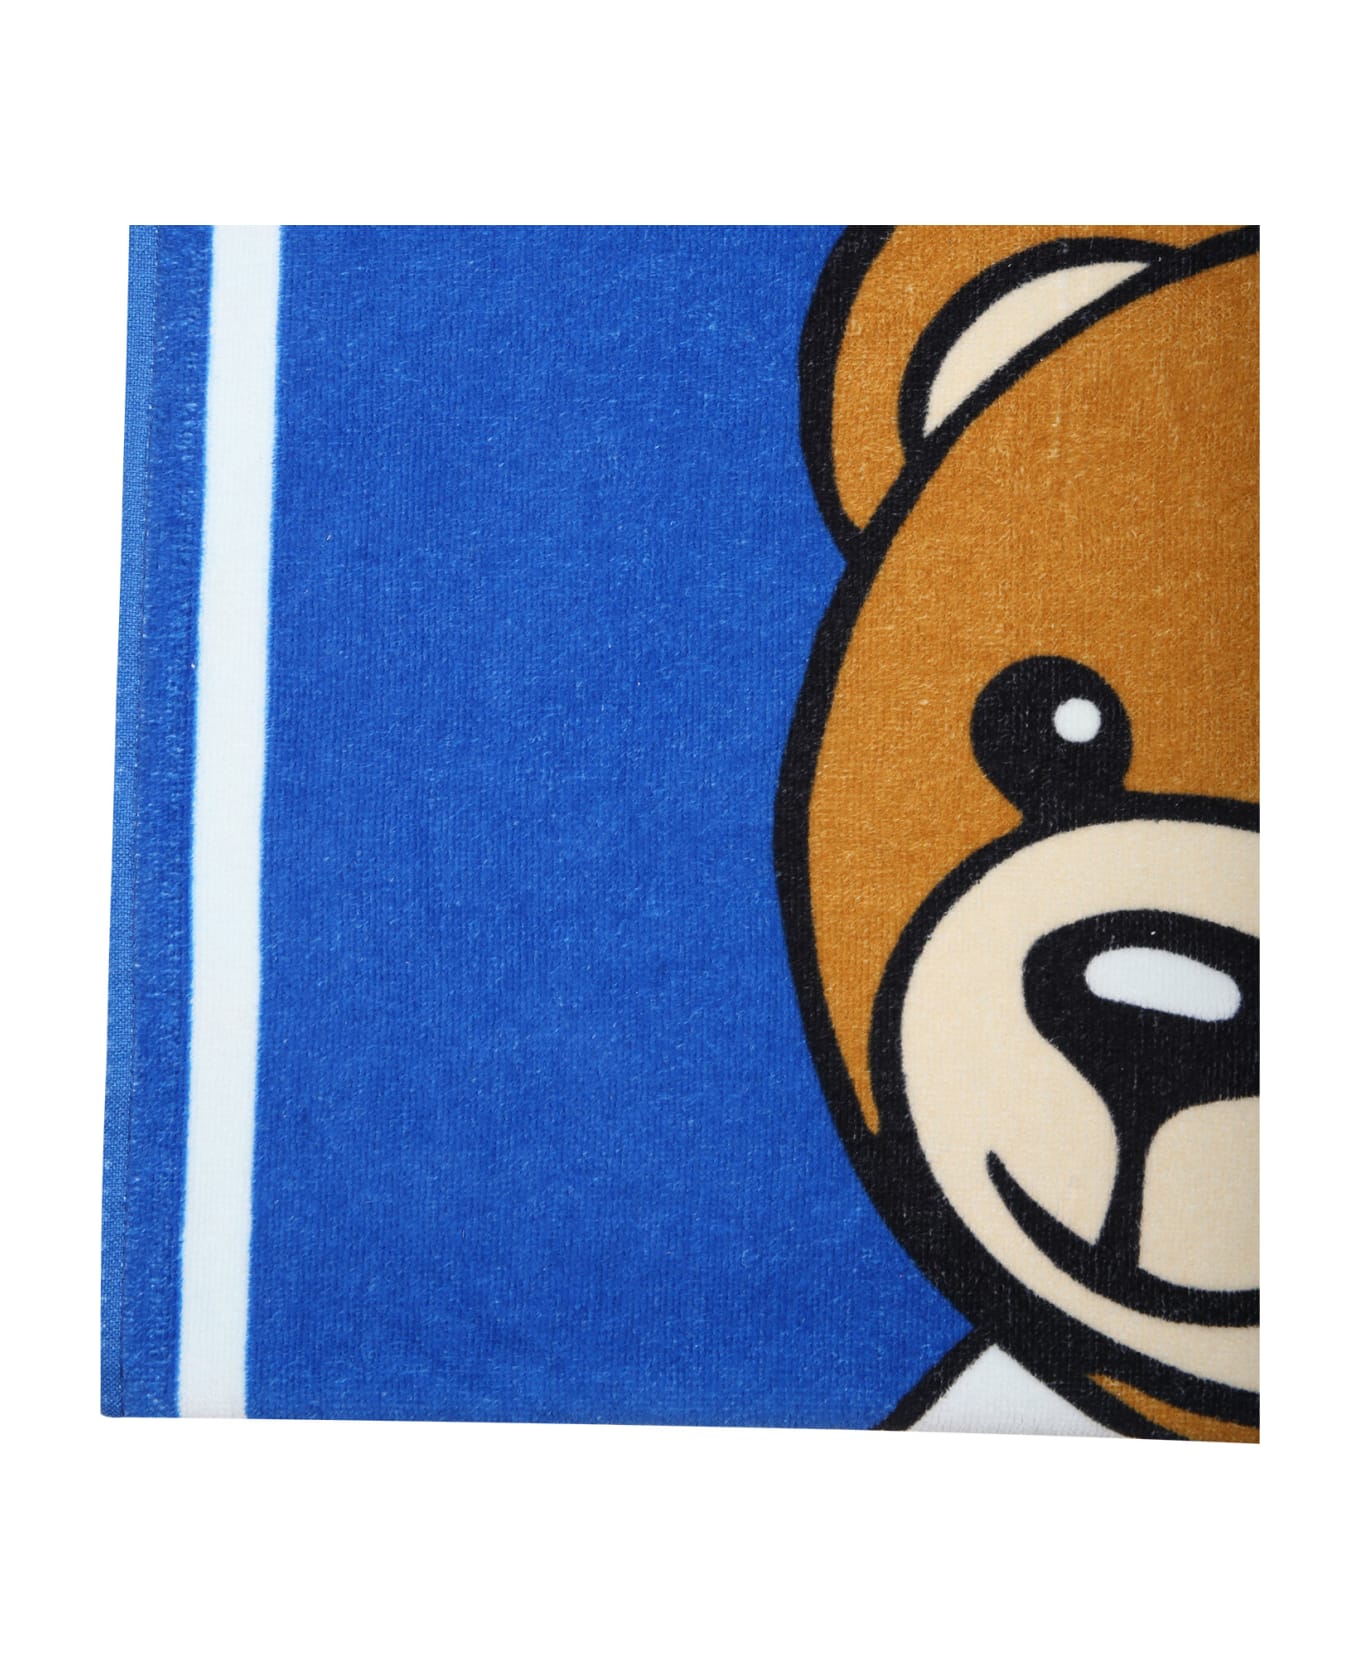 Moschino Light Blue Beach Towel For Boy With Teddy Bear And Surfboard - Light Blue アクセサリー＆ギフト